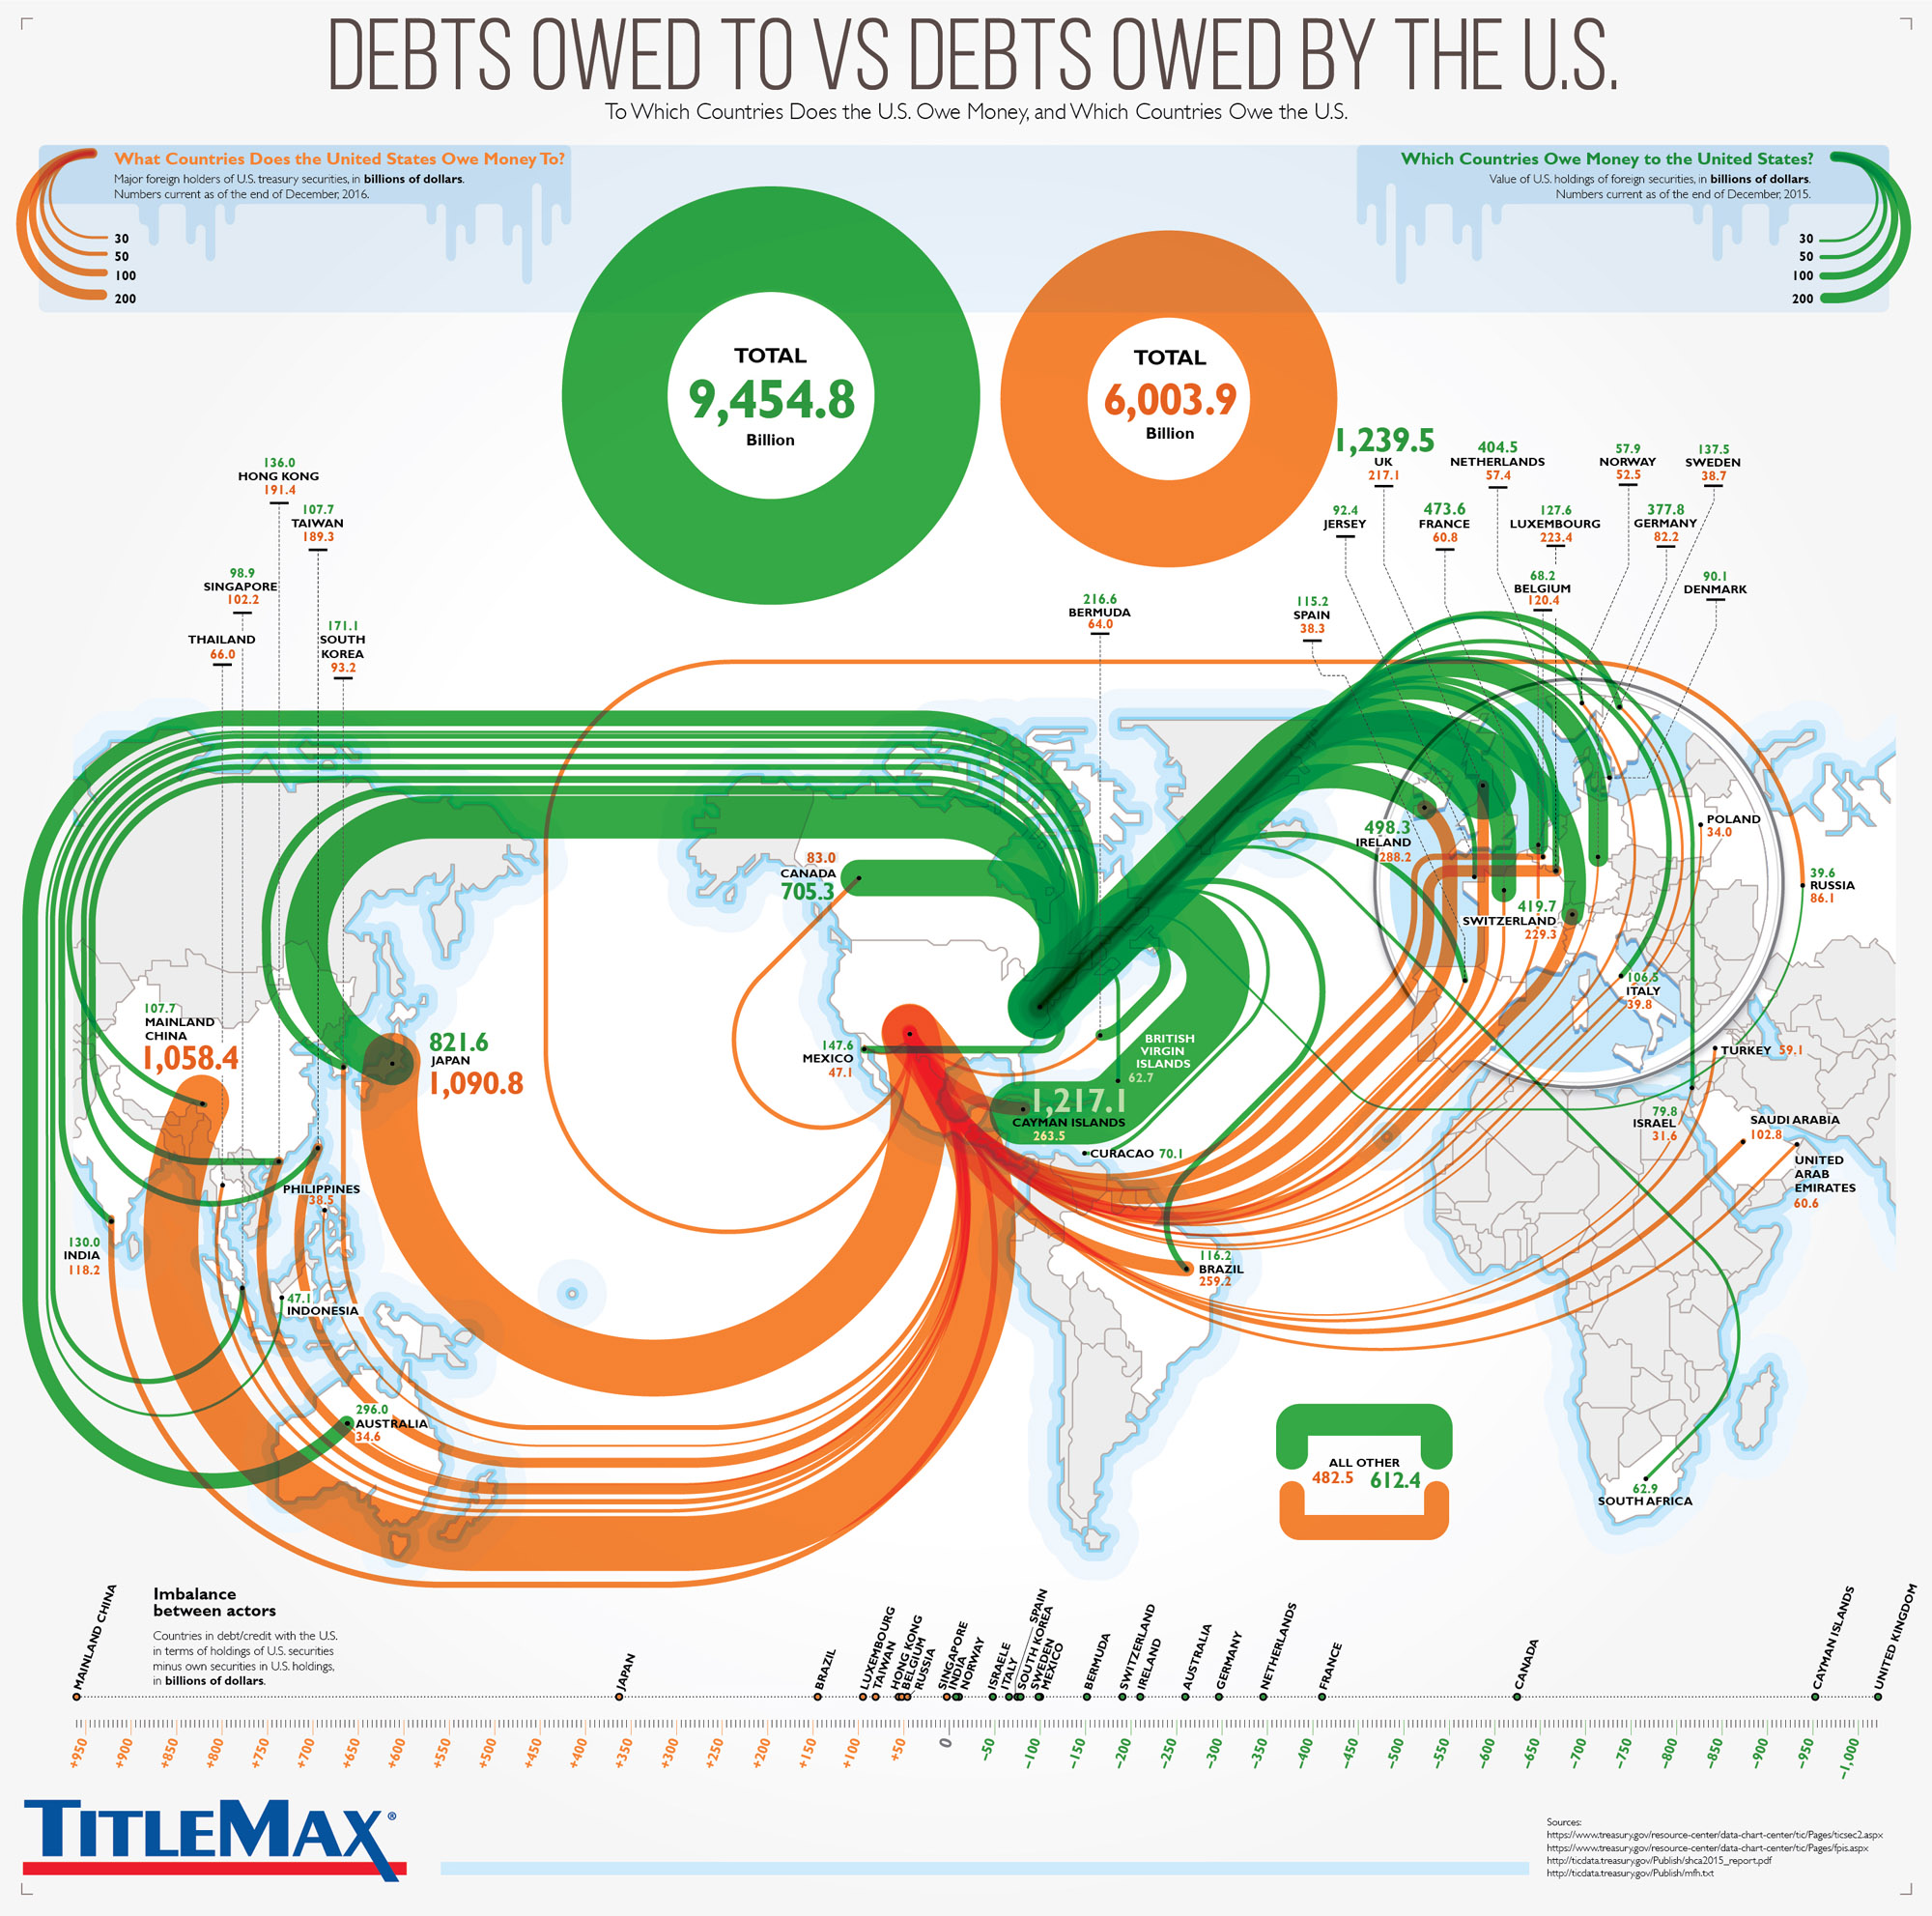 Debts Owed By the US Government VS Debts Owed To It